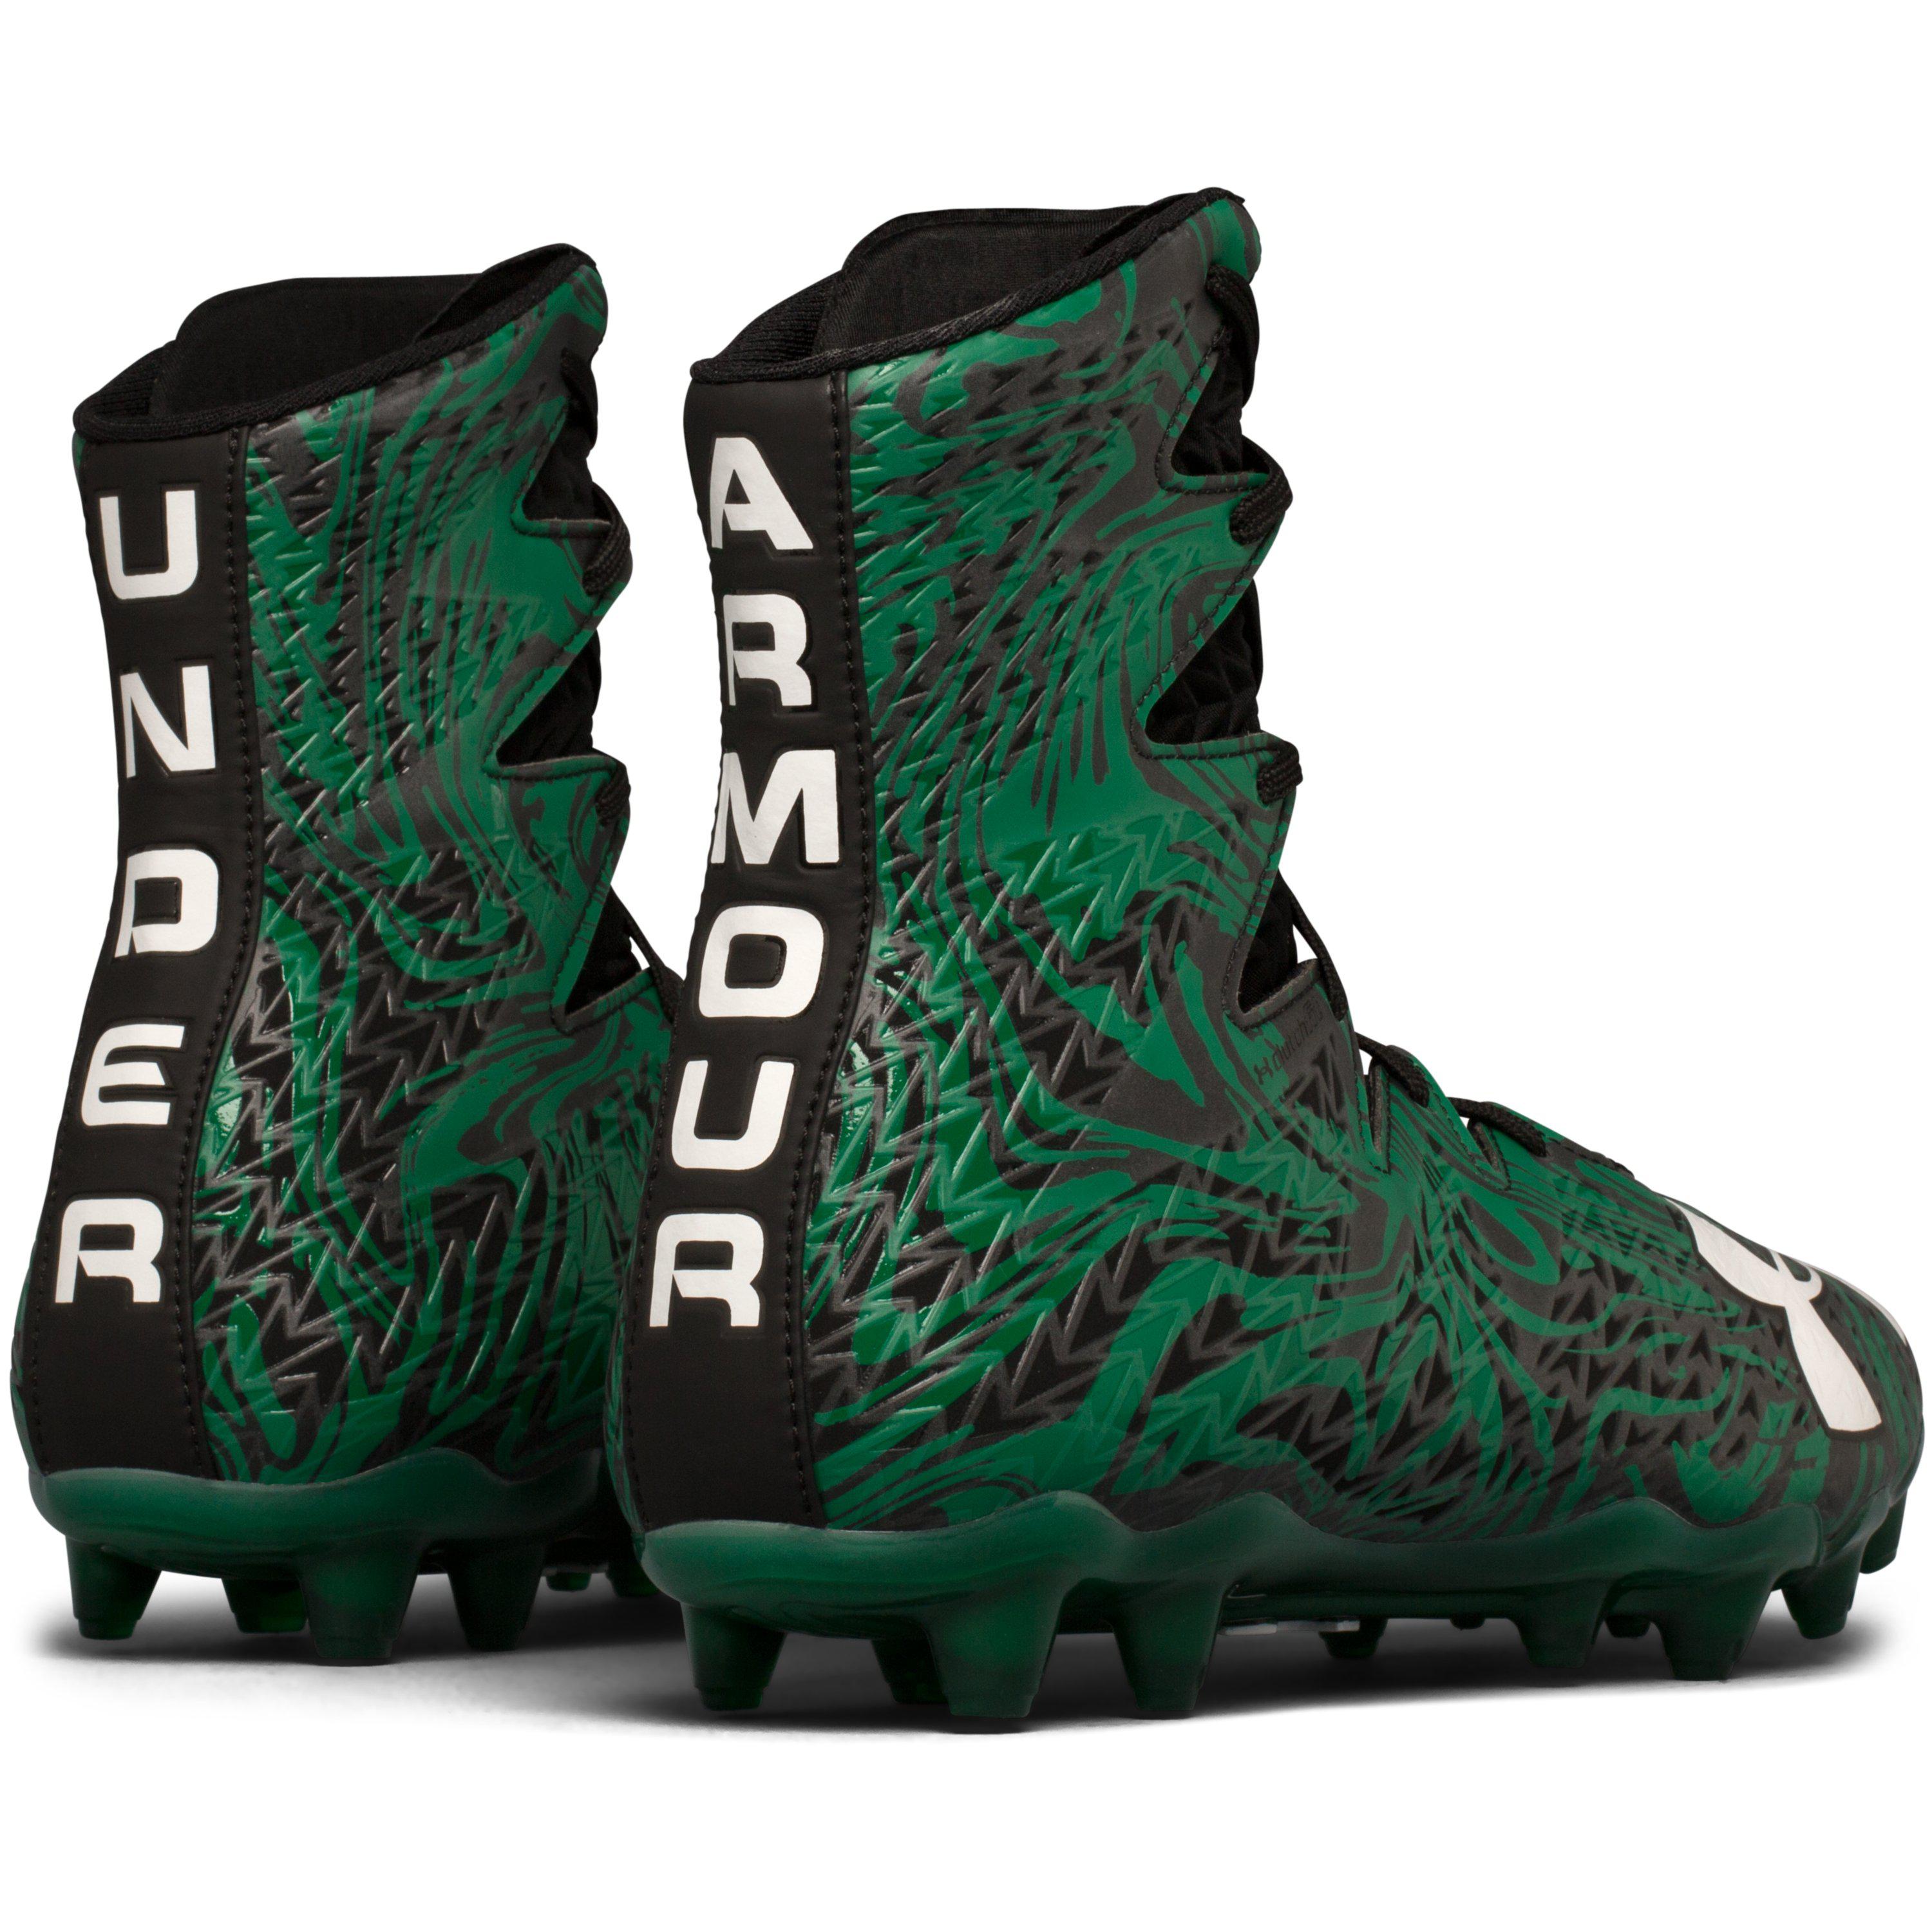 New Mens Under Armour Highlight LUX MC Lacrosse/Football Cleats Green/Black 10 M 